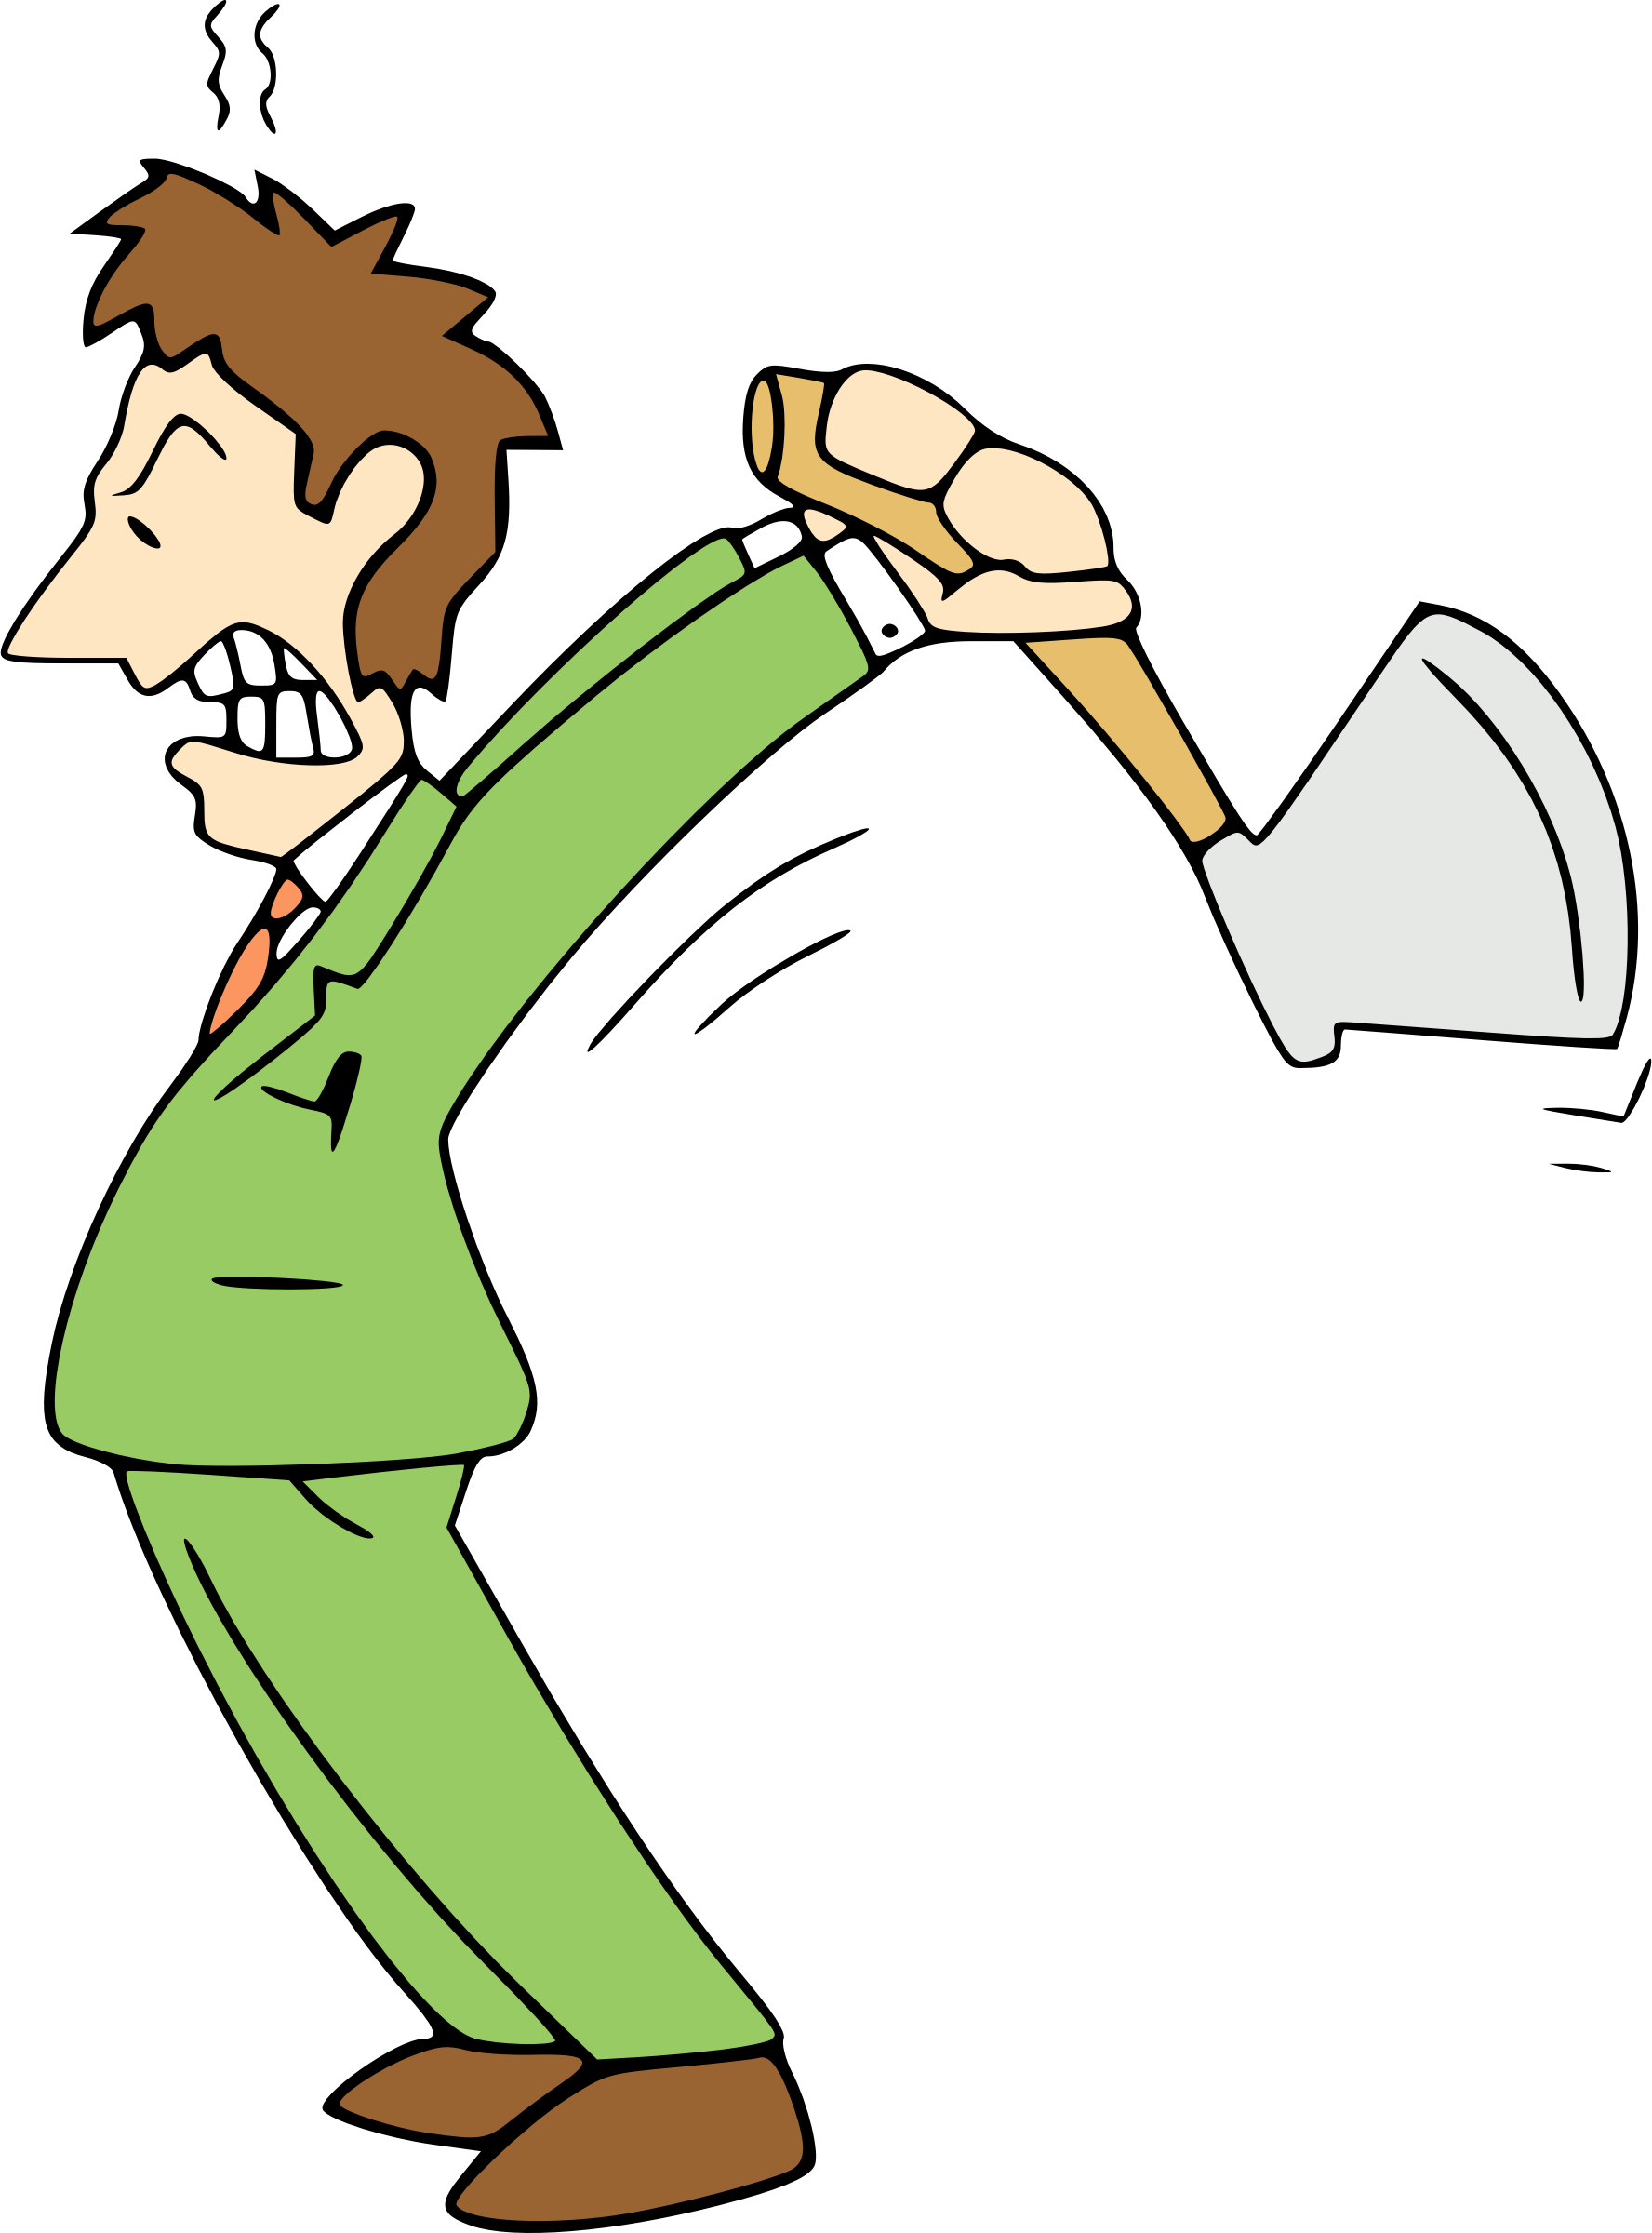 Angry with big image. Axe clipart man